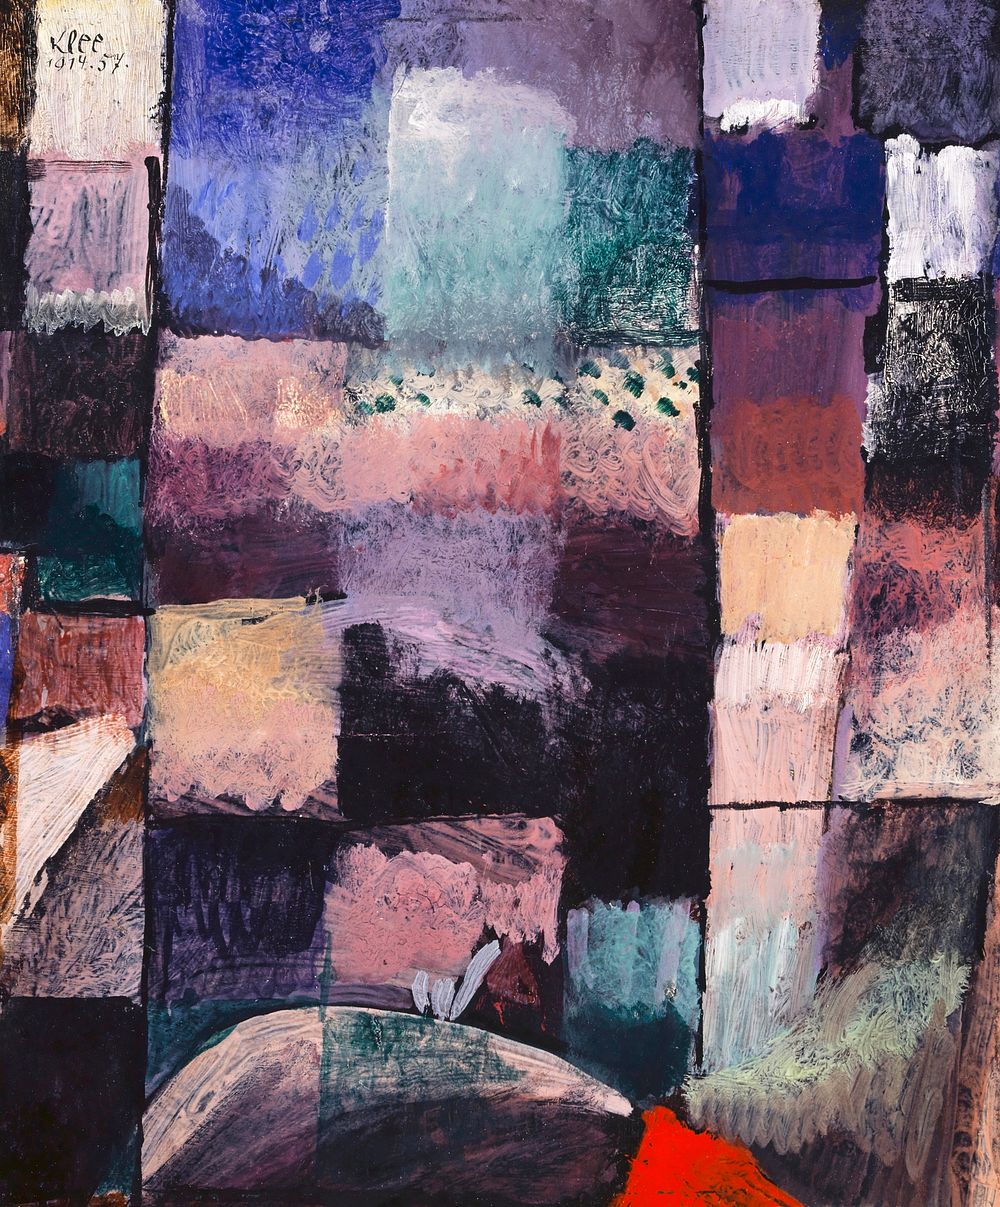 About a motif from Hammamet (1914) painting in high resolution by Paul Klee. Original from the Kunstmuseum Basel Museum.…